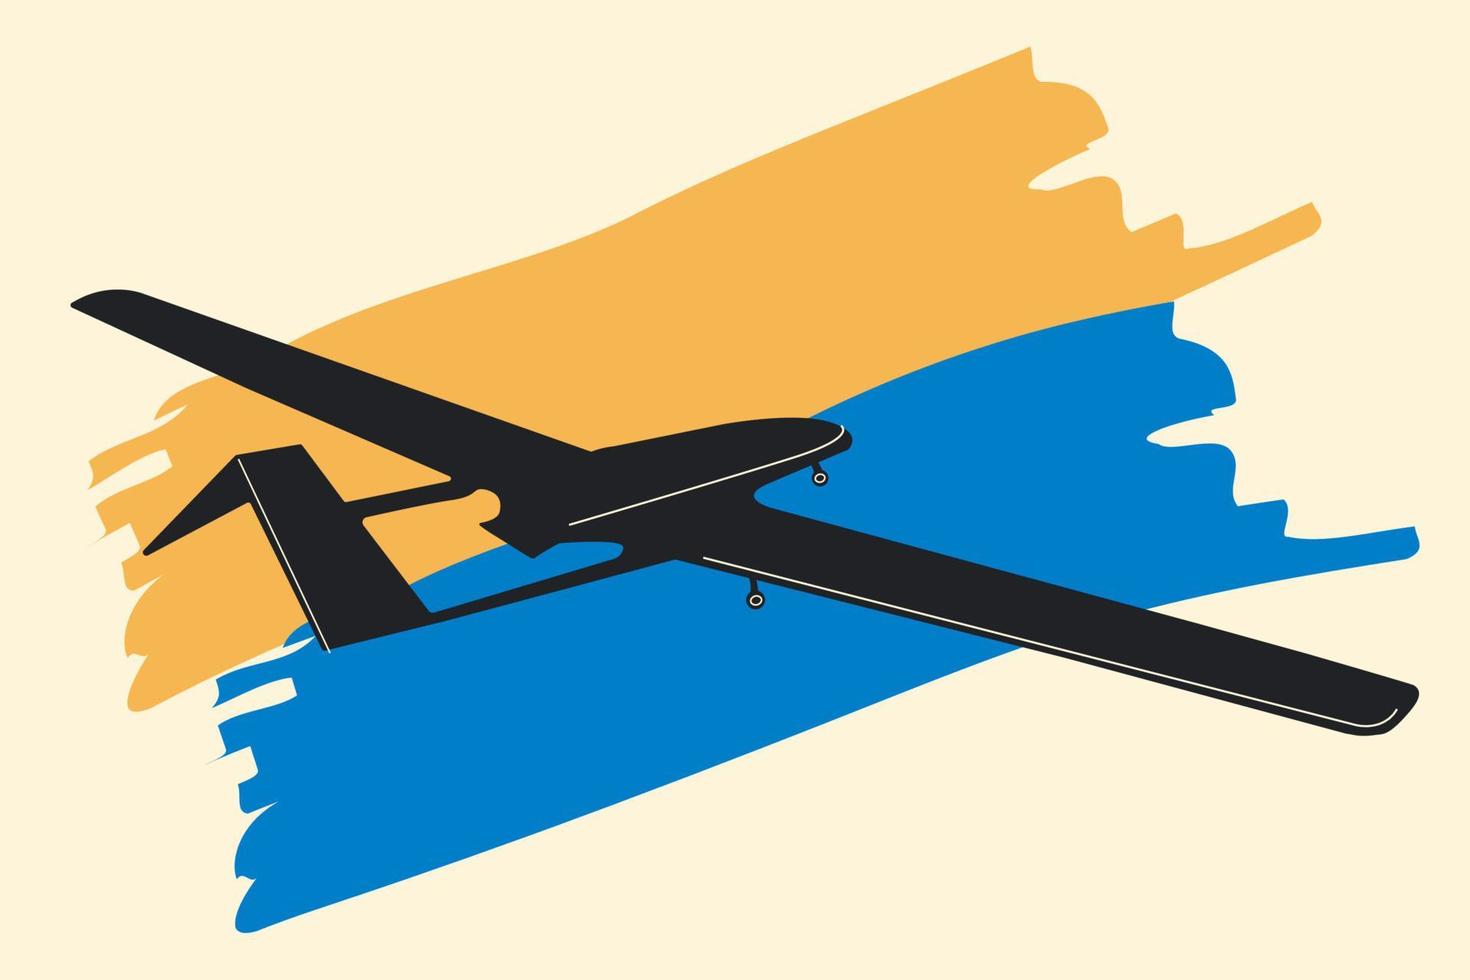 Unmanned aerial vehicle Bayraktar TB2 SIHA silhouette vector on a Ukraine flag background. Vector drawing of unmanned combat aerial vehicle. Side view. Image for illustration and infographics.